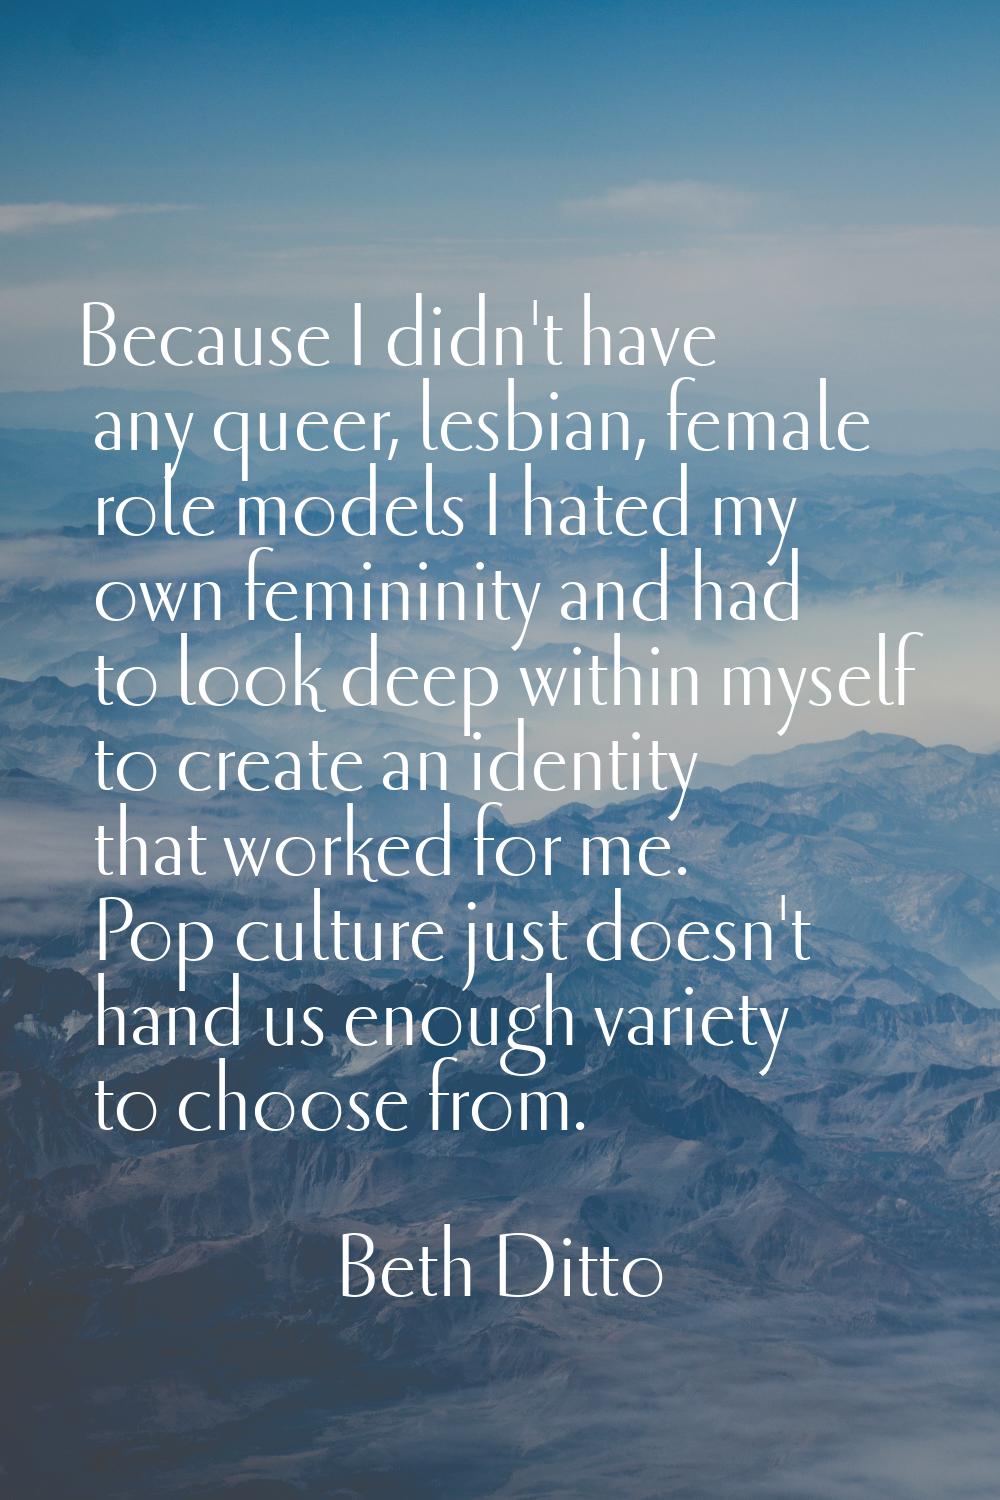 Because I didn't have any queer, lesbian, female role models I hated my own femininity and had to l